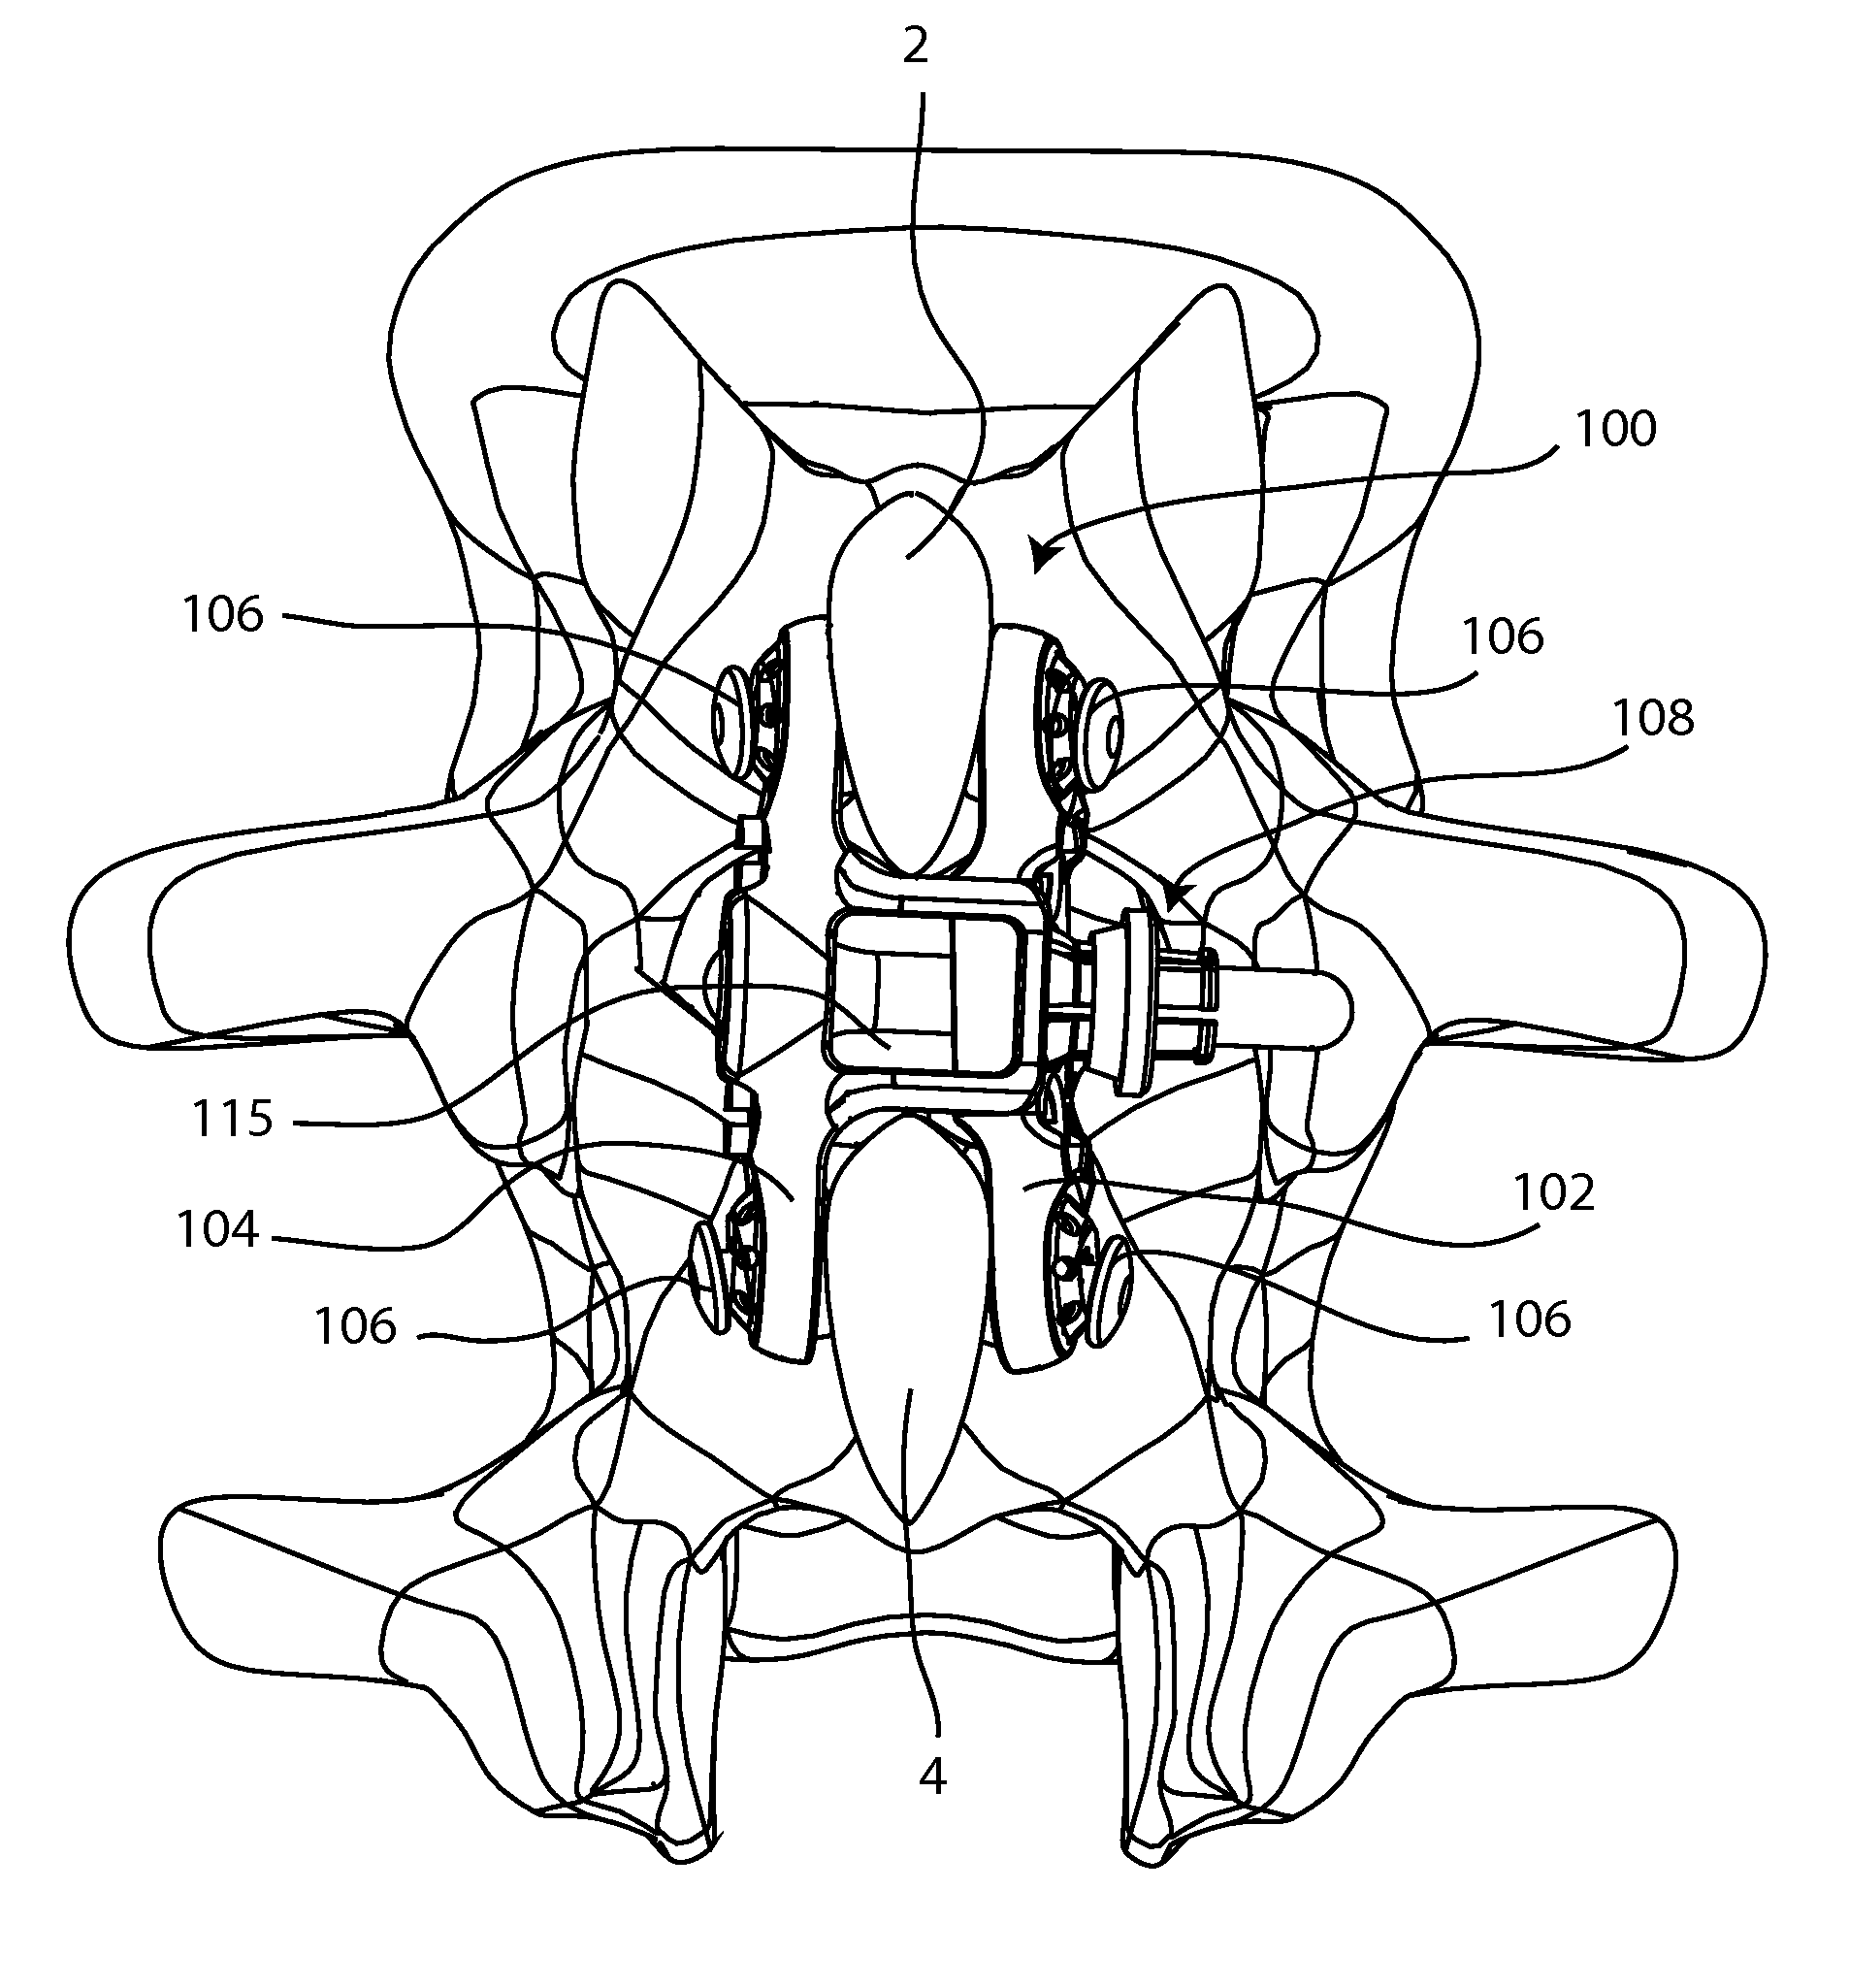 Spinous process fusion implants and insertion, compression, and locking instrumentation